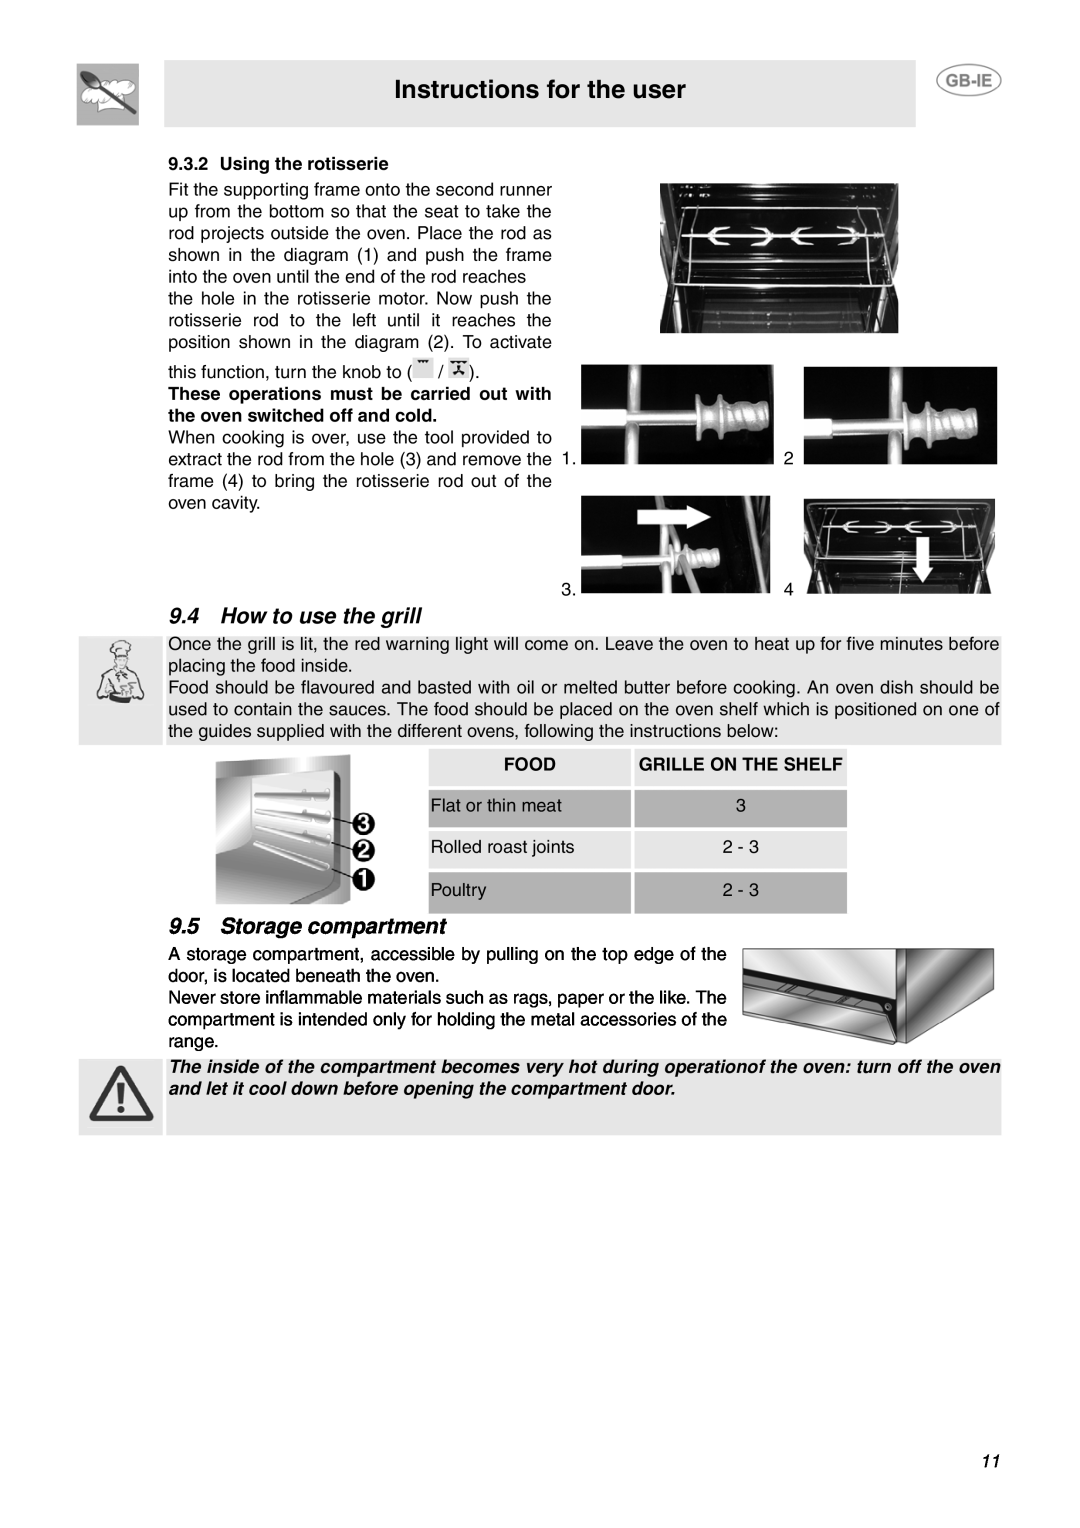 Smeg SUK91CMX5 manual How to use the grill, Storage compartment, Instructions for the user, Using the rotisserie, Food 